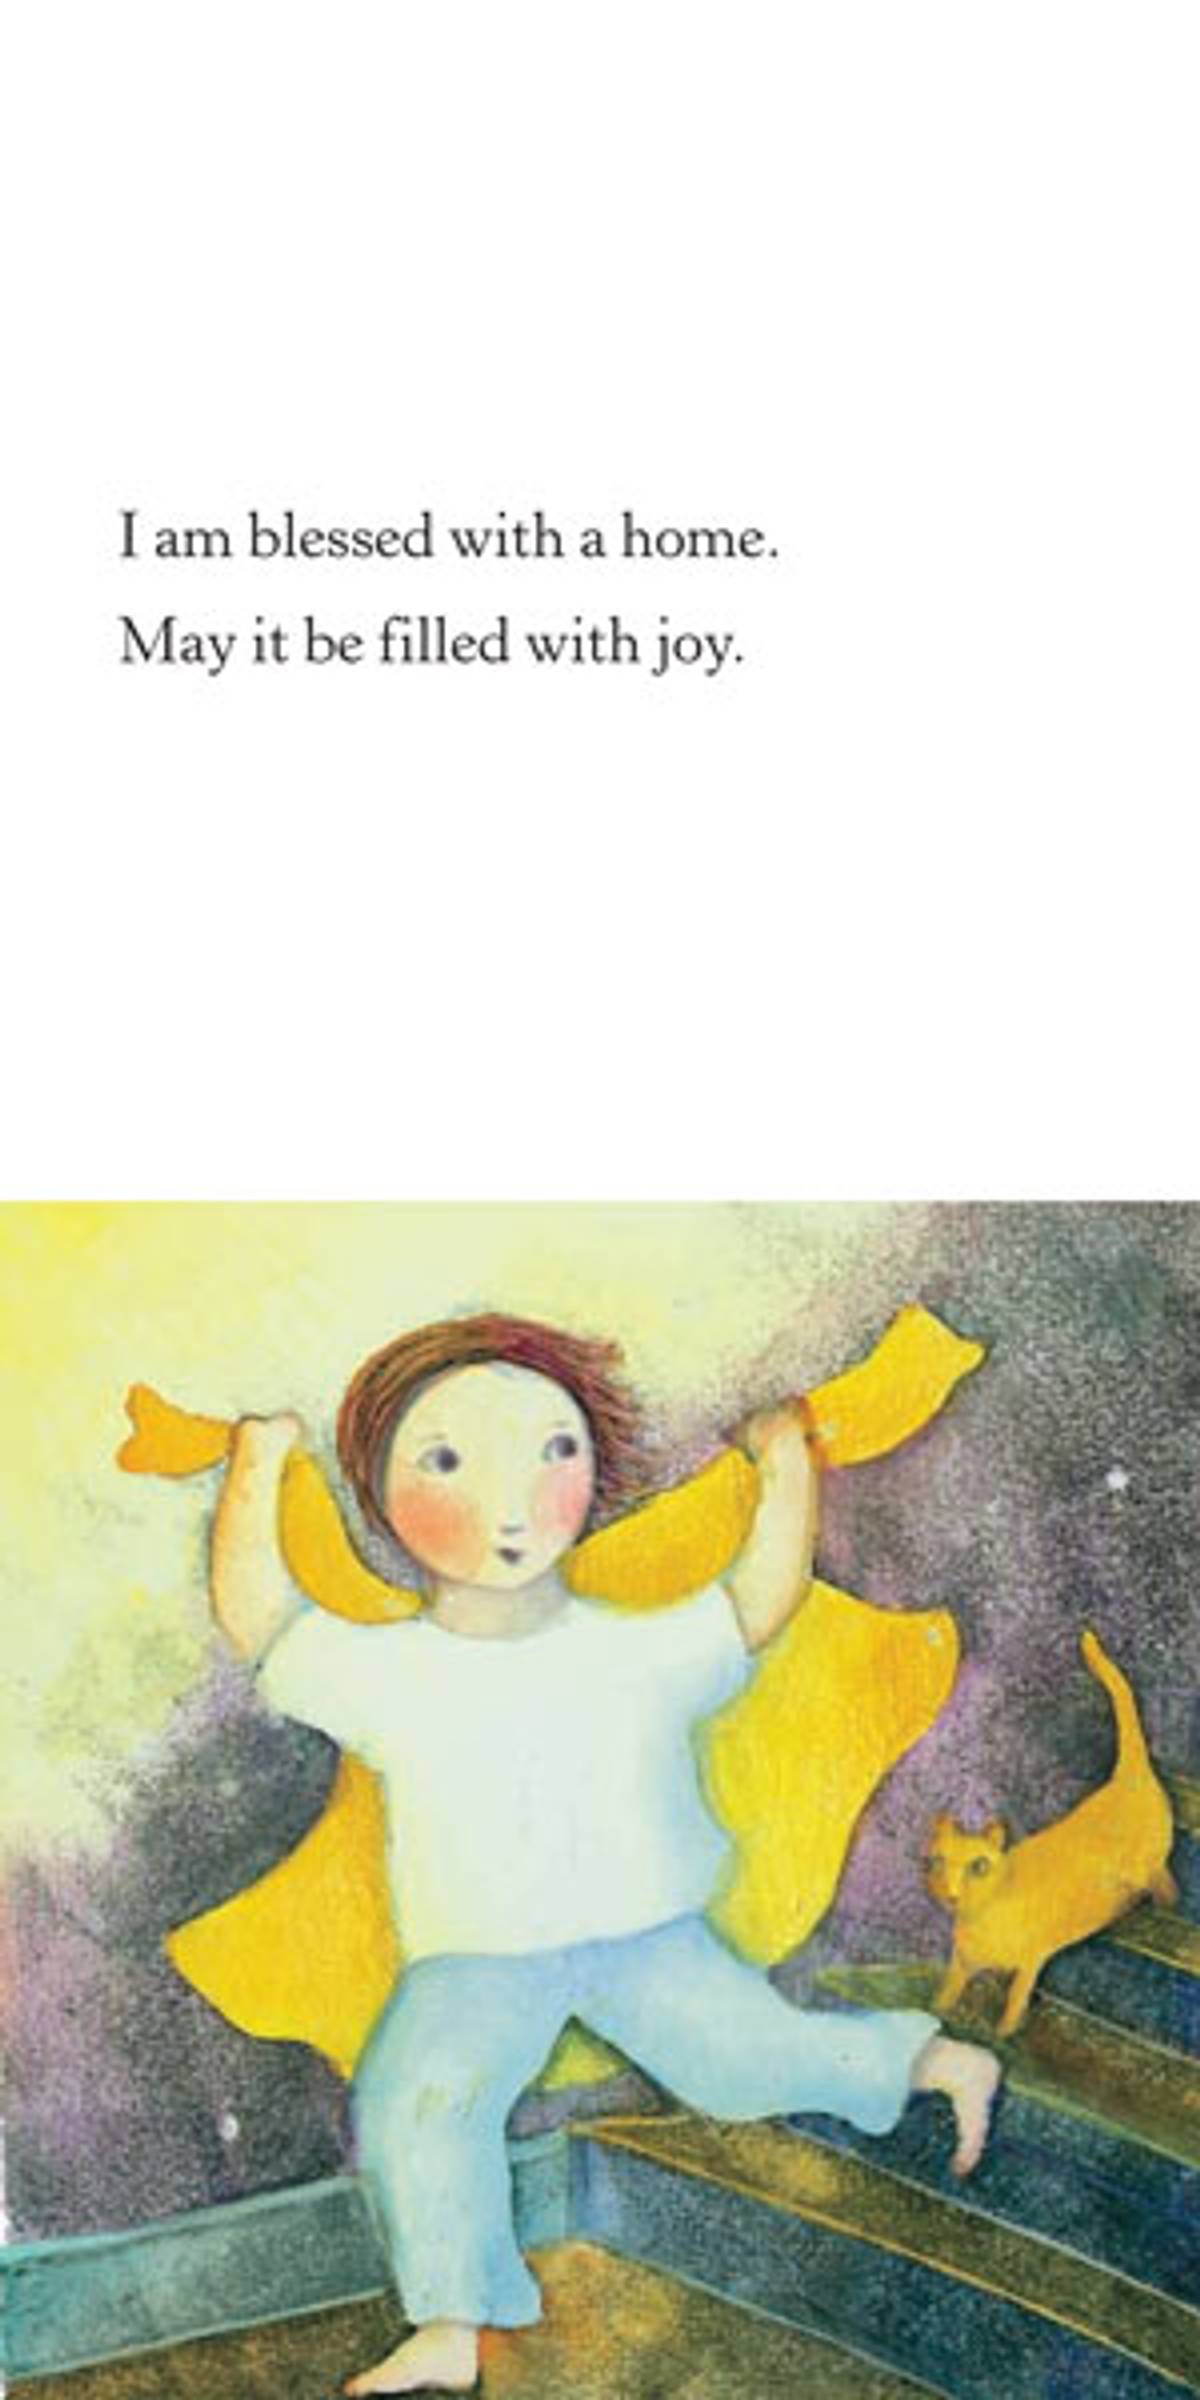 From ‘Modeh Ani: A Good Morning Book,’ adapted by Sarah Gershman and illustrated by Kristina Swarner (Courtesy EKS Publishing Co.)